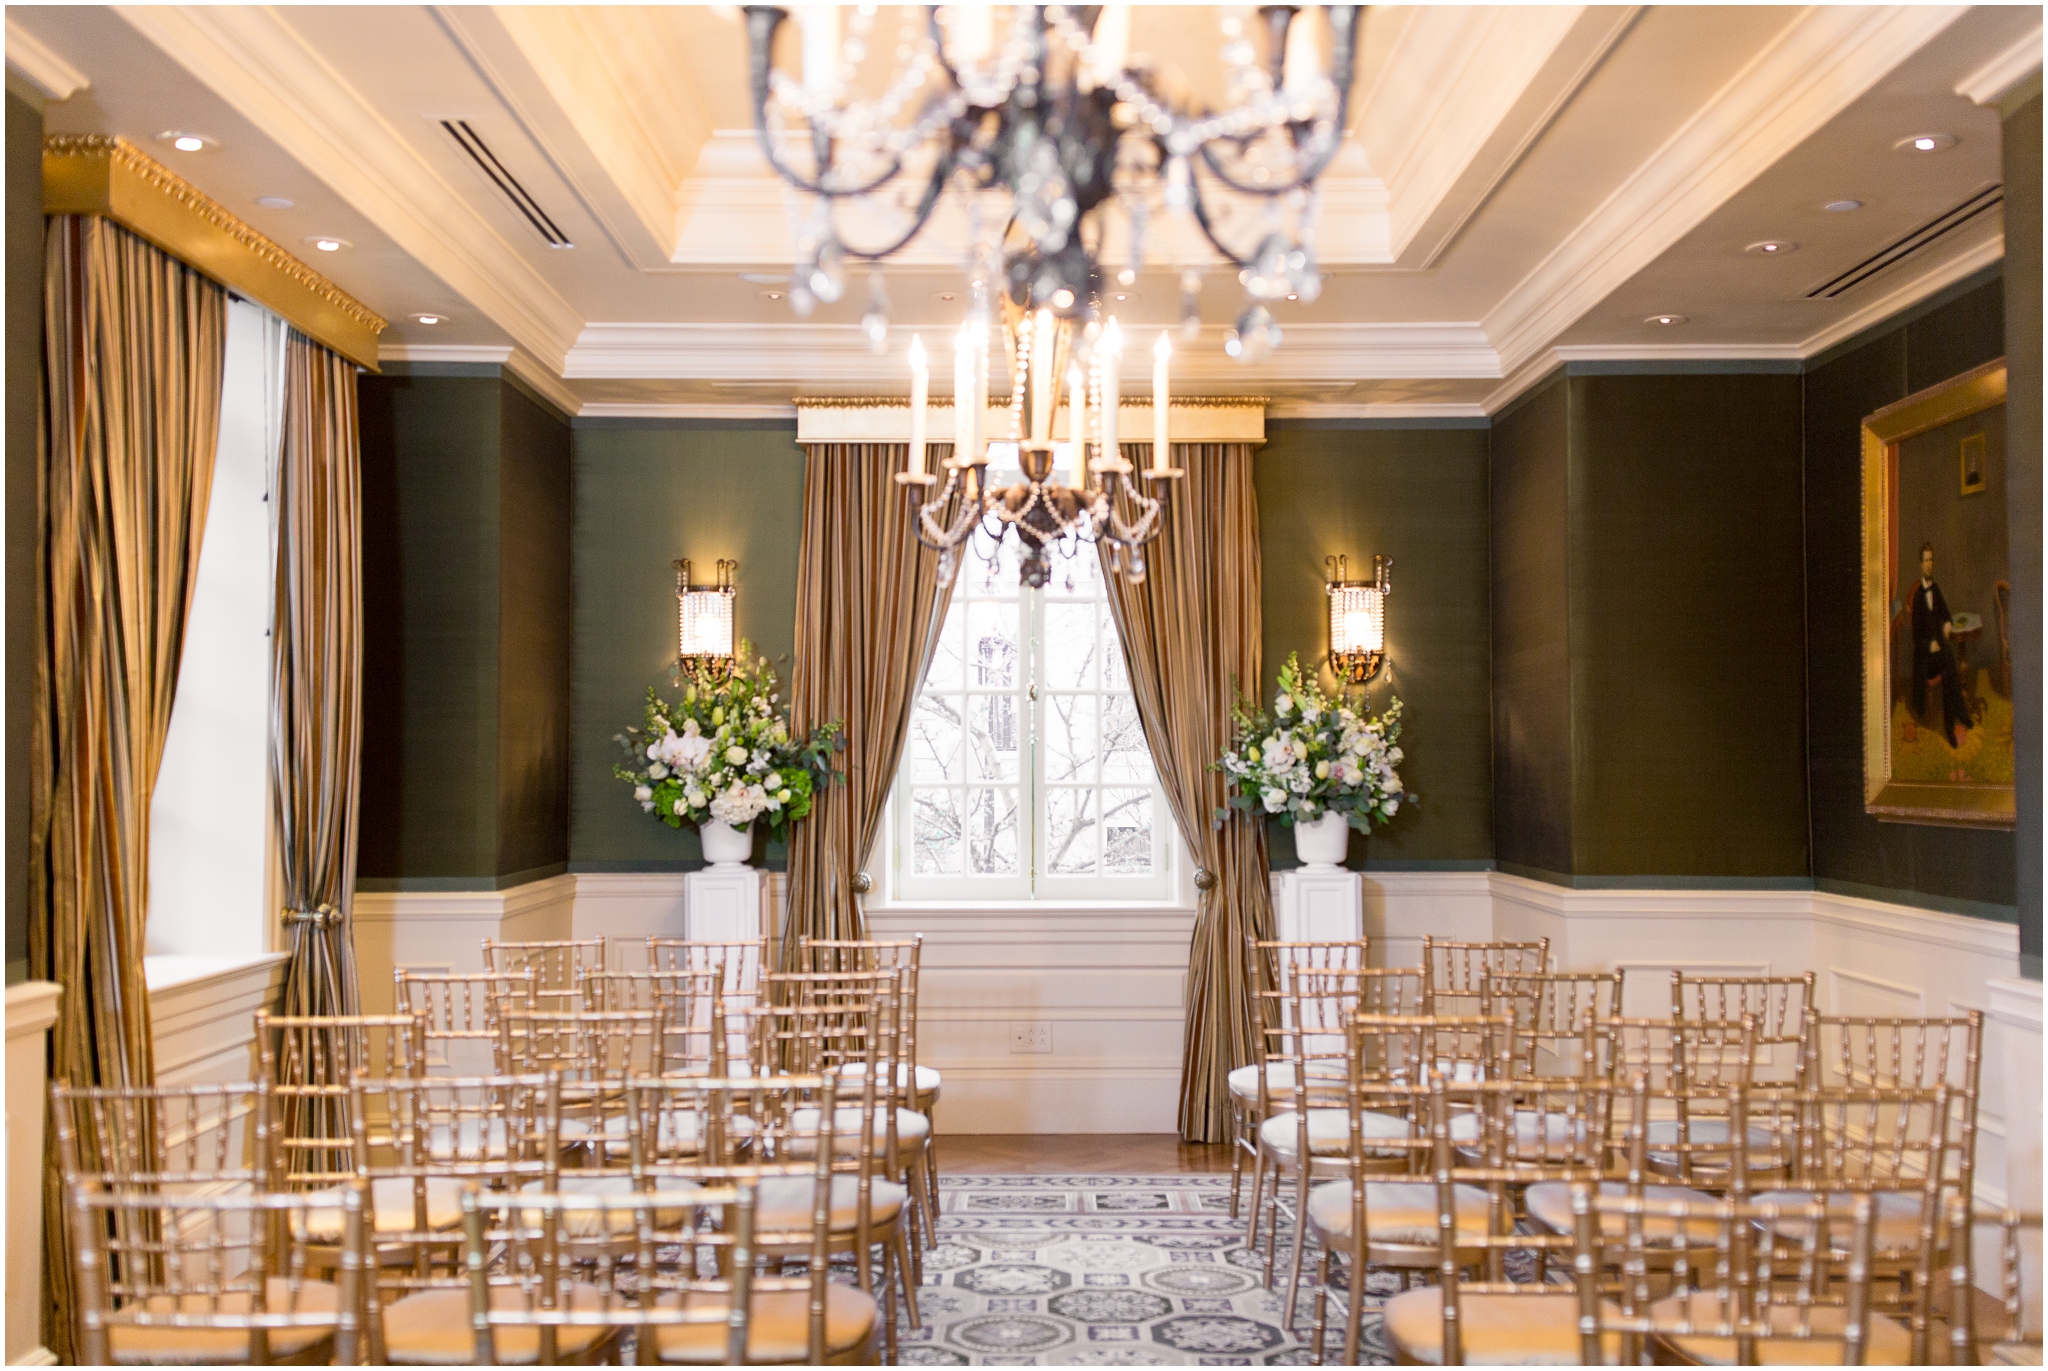 Jefferson Hotel wedding with art-deco style and gold accents